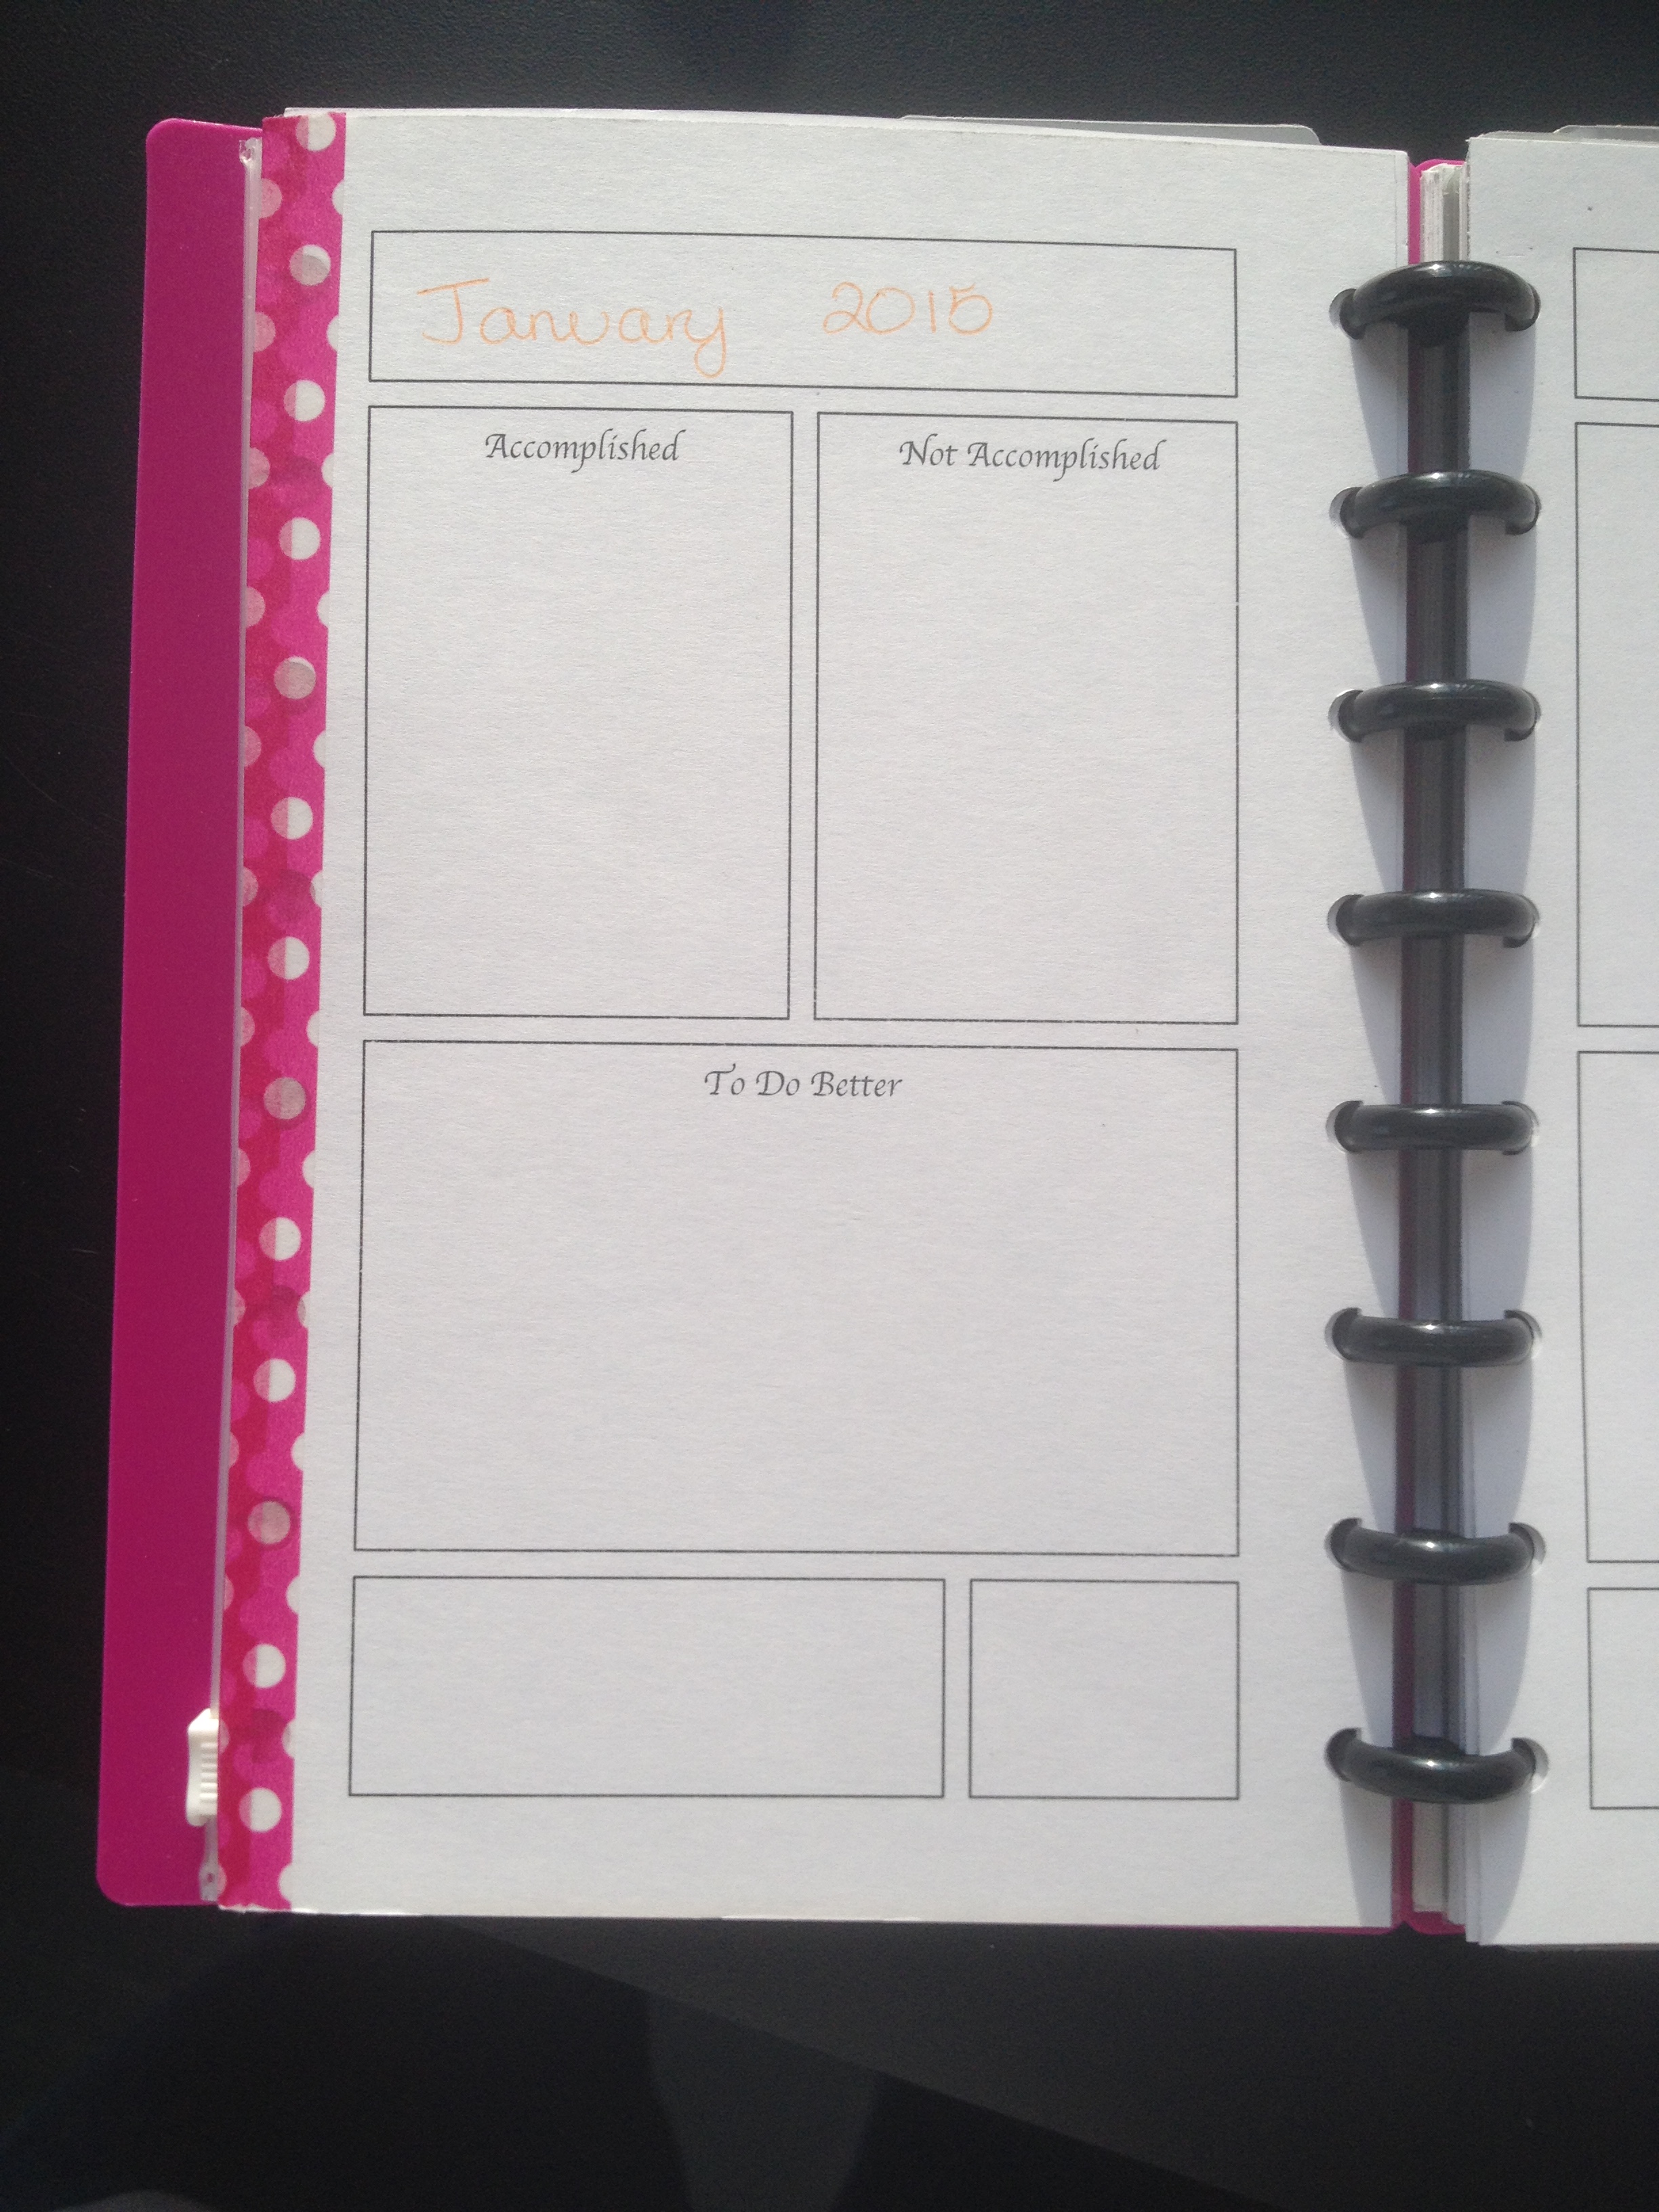 Emma's Simple Word Printable for her ARC Planner